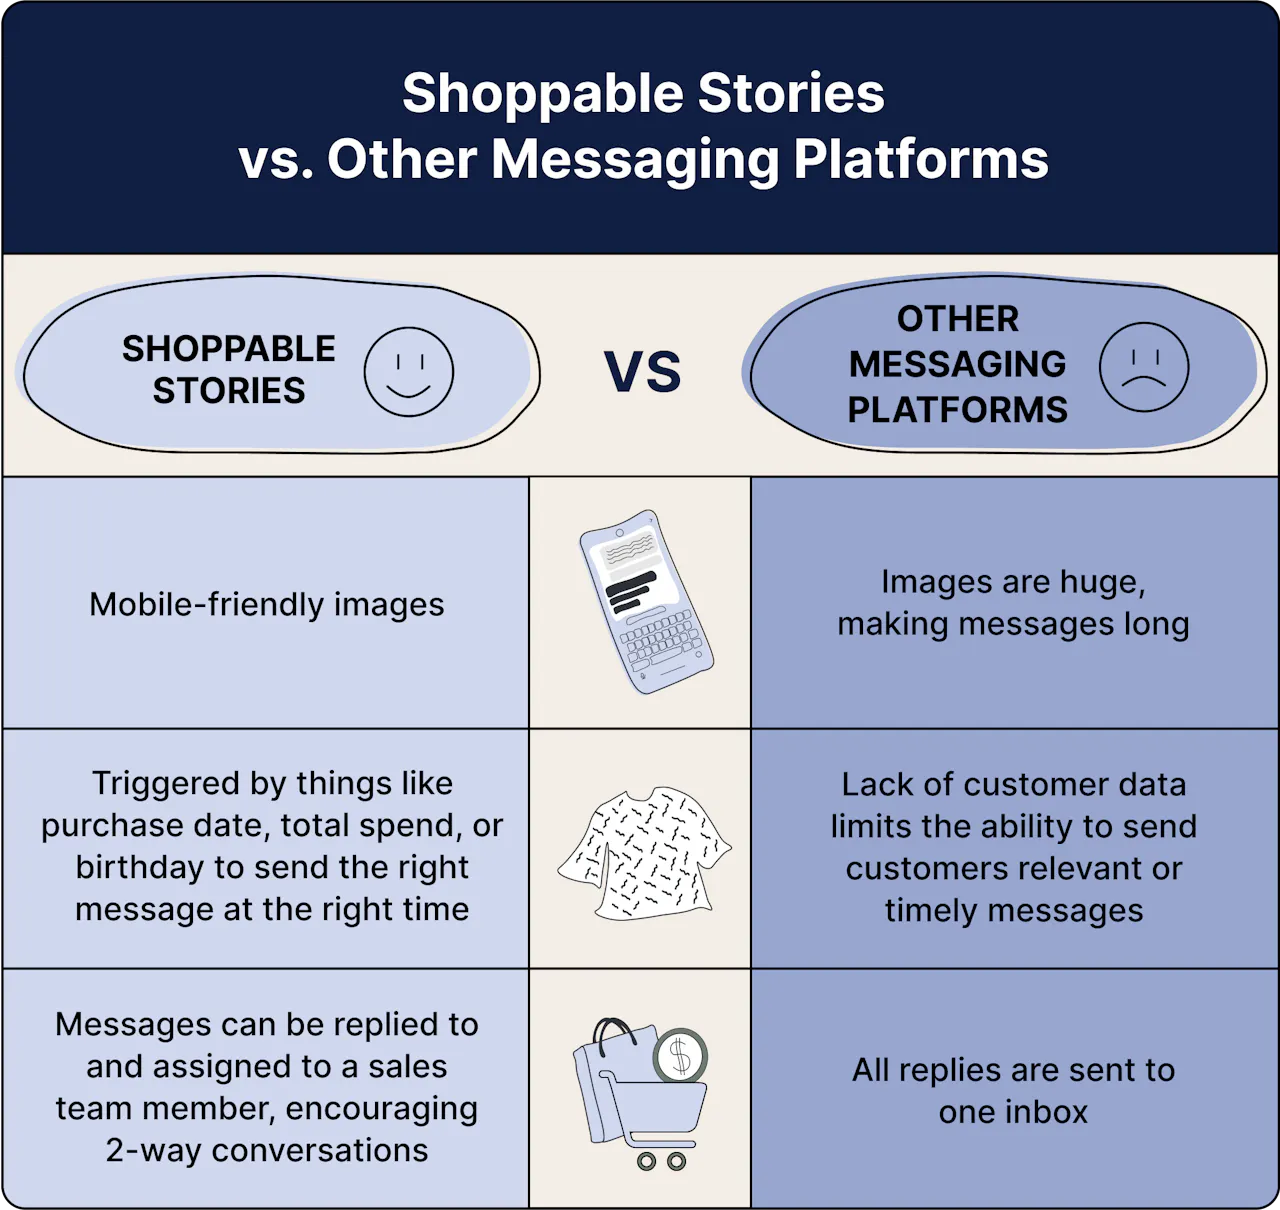 Endear's Shoppable Stories  vs. Other Messaging Platforms